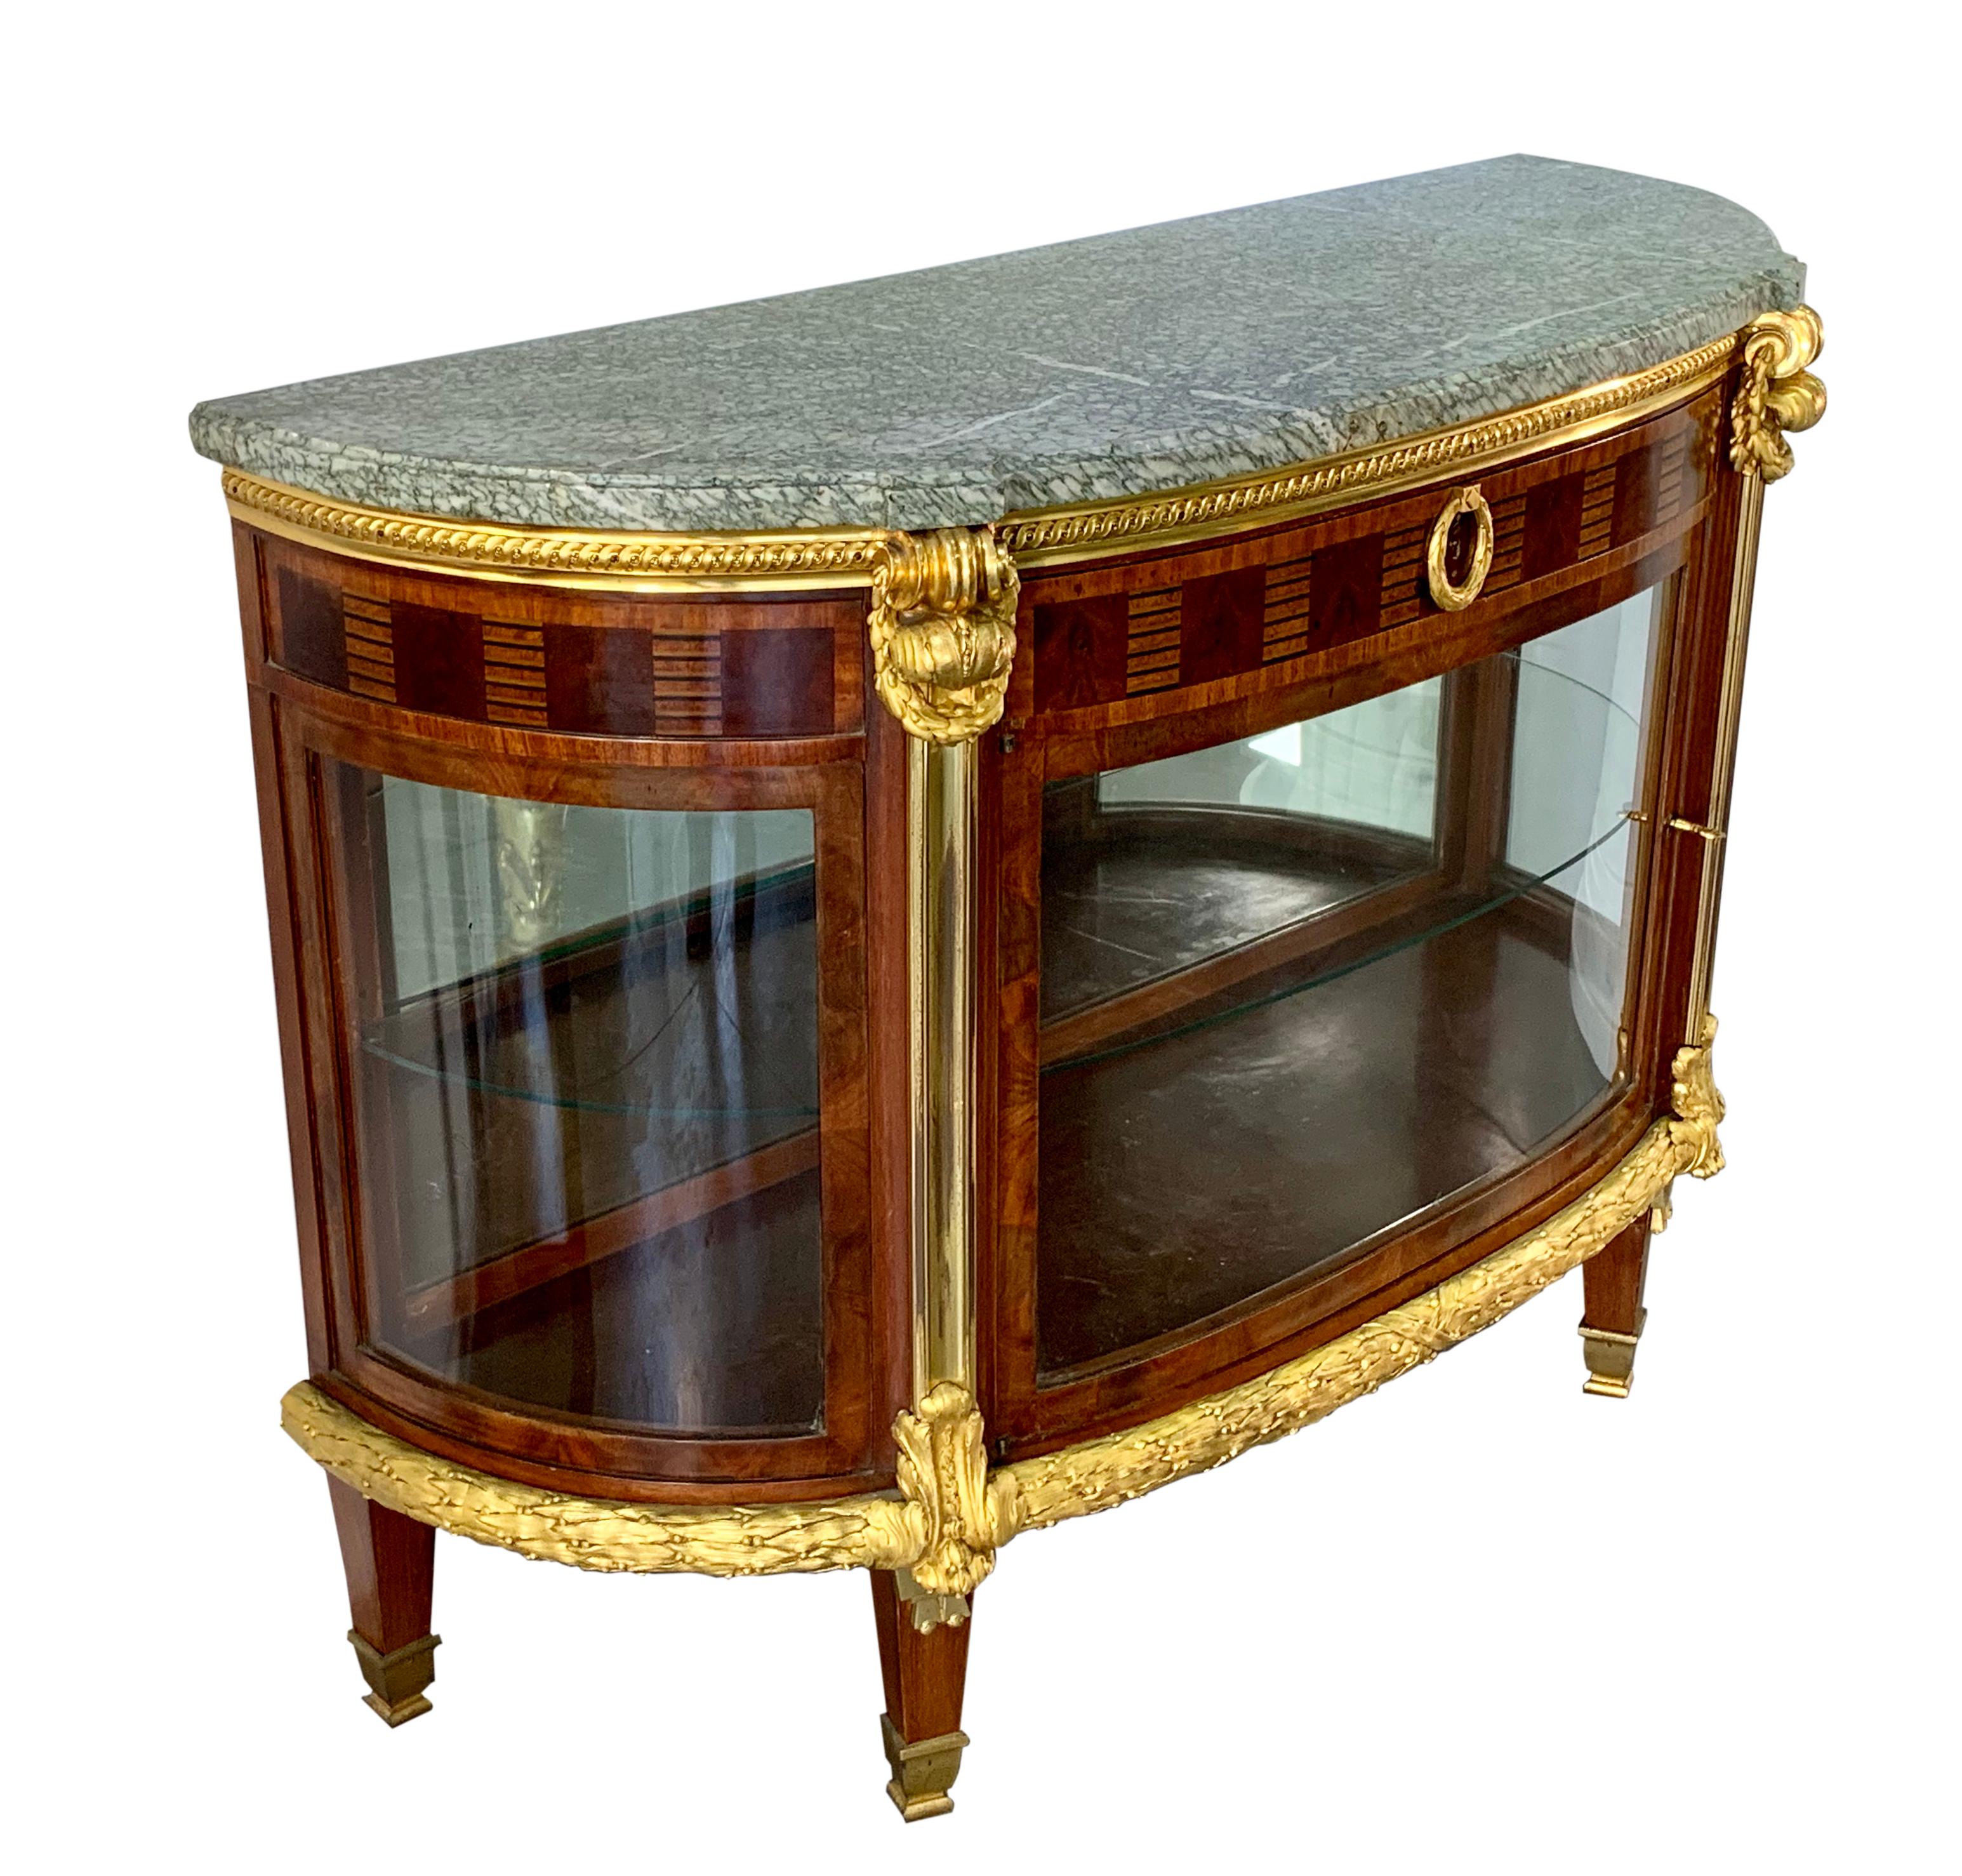 Louis XVI French 19th Century Ormolu Mounted D-Shaped Commode or Vitrine